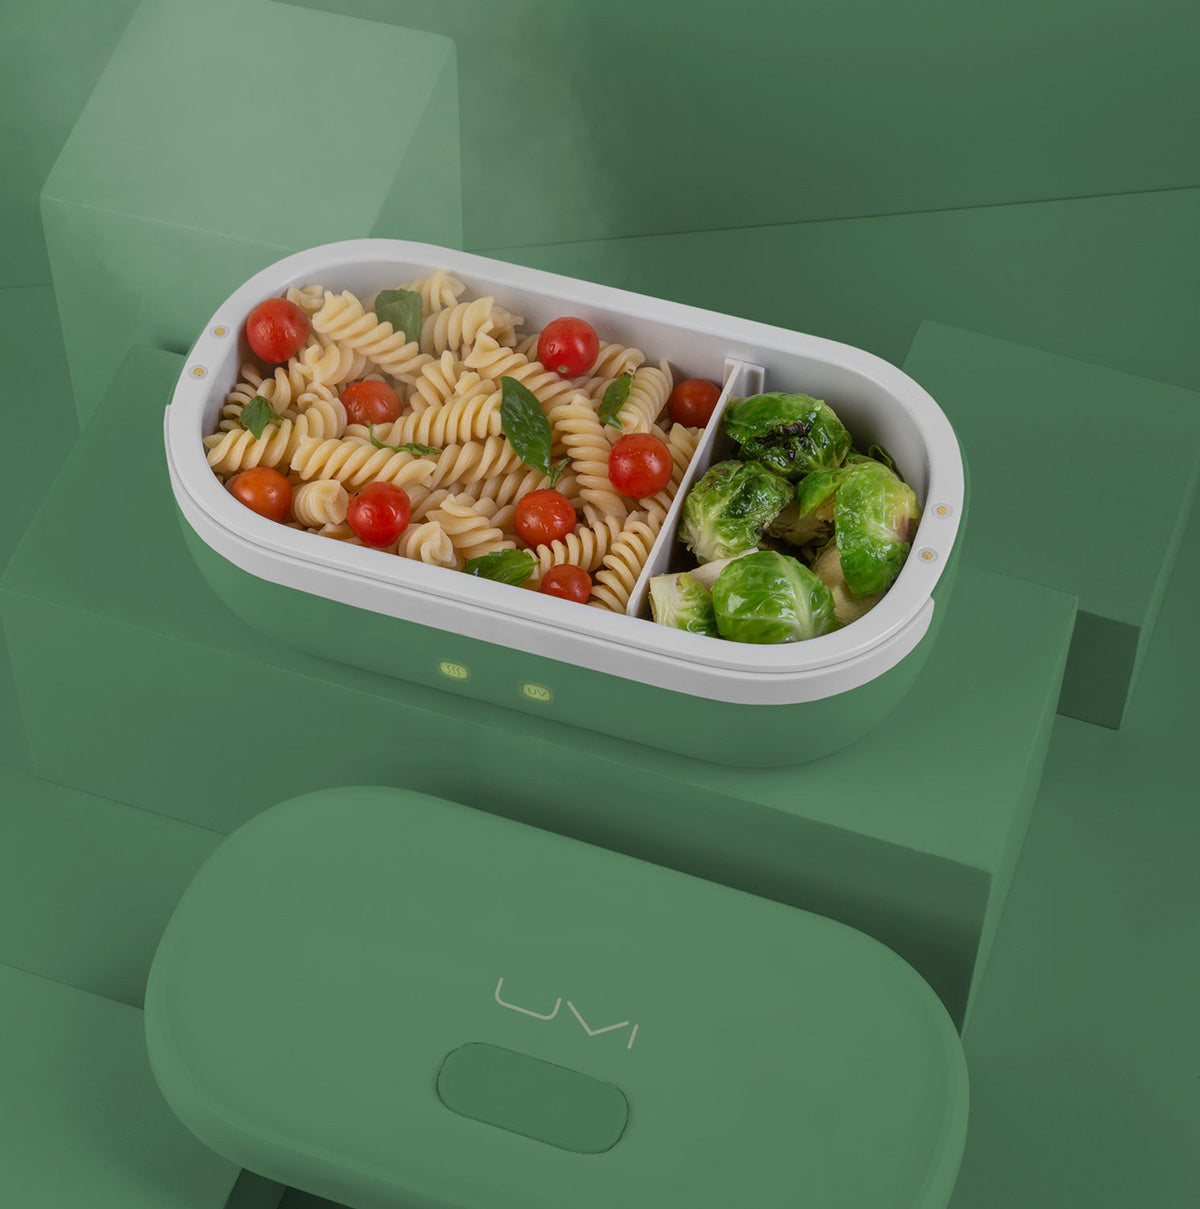 Electric Lunch Box, Self Cooking Electric Lunch Box, Heating Lunch Box, Portable  Food Warmer Lunch Box for Home and Office